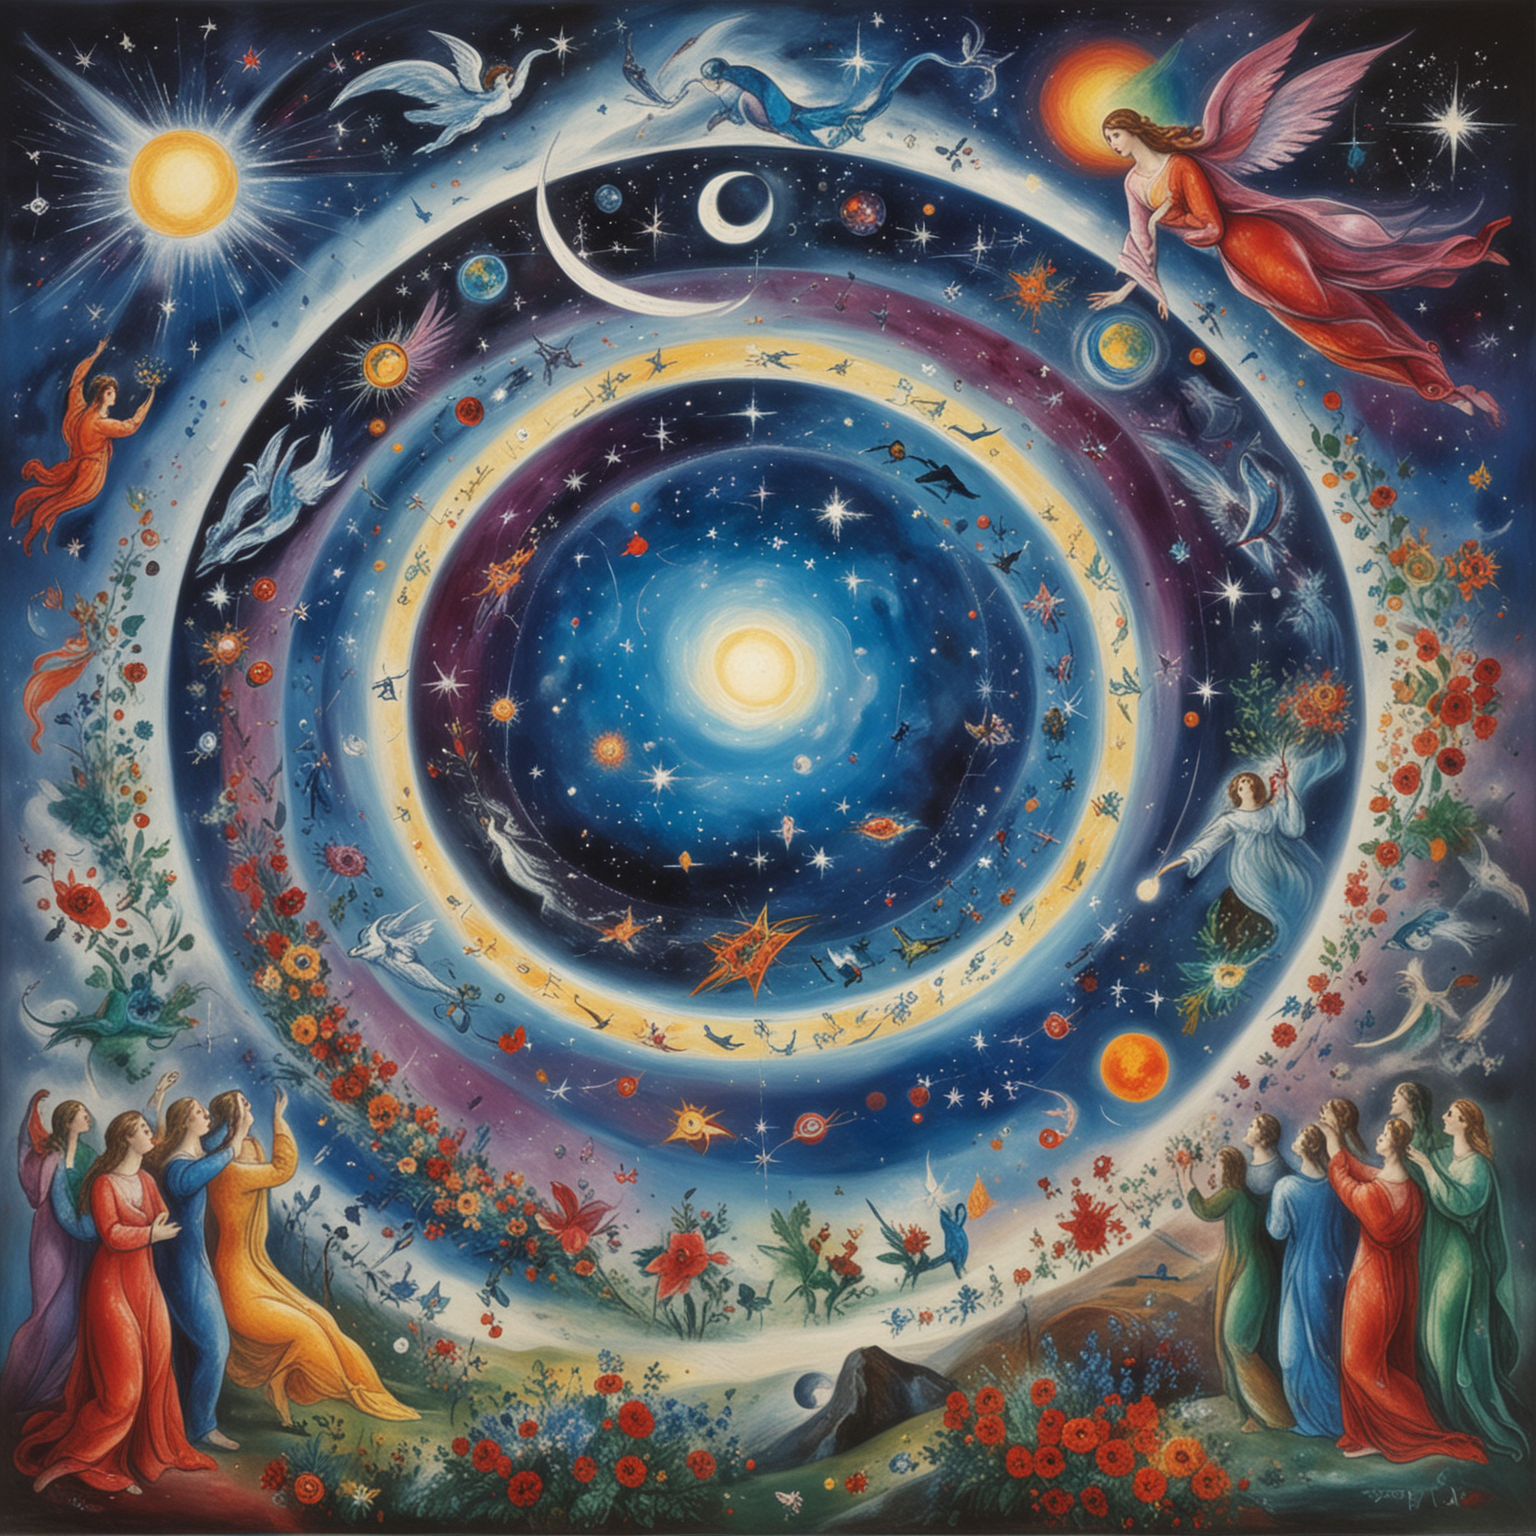 Chagall Style Divine Creation of the Universe Artwork